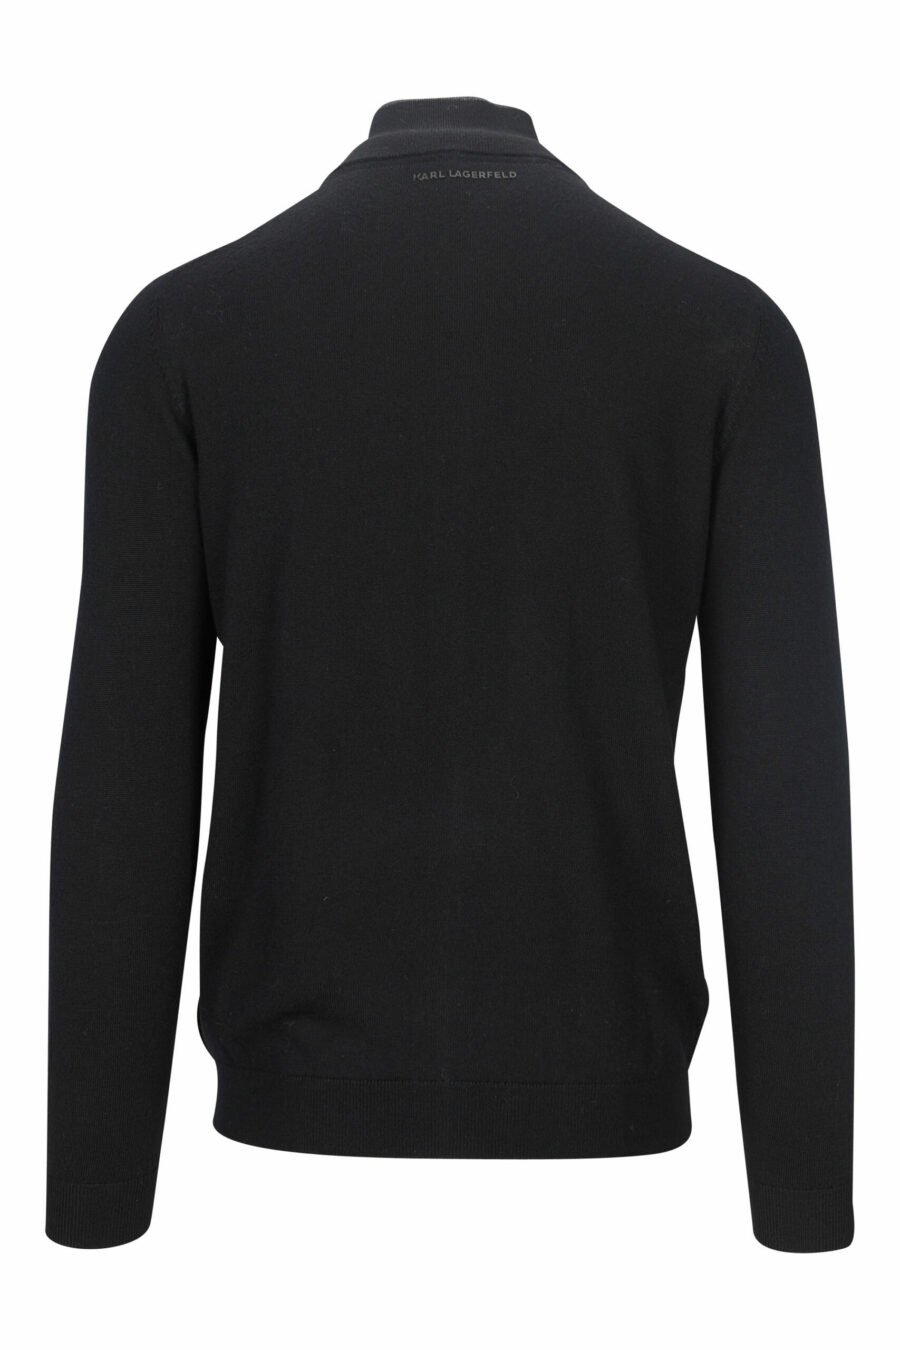 Black sweatshirt with zip and monochrome minilogue - 4062226635752 1 scaled